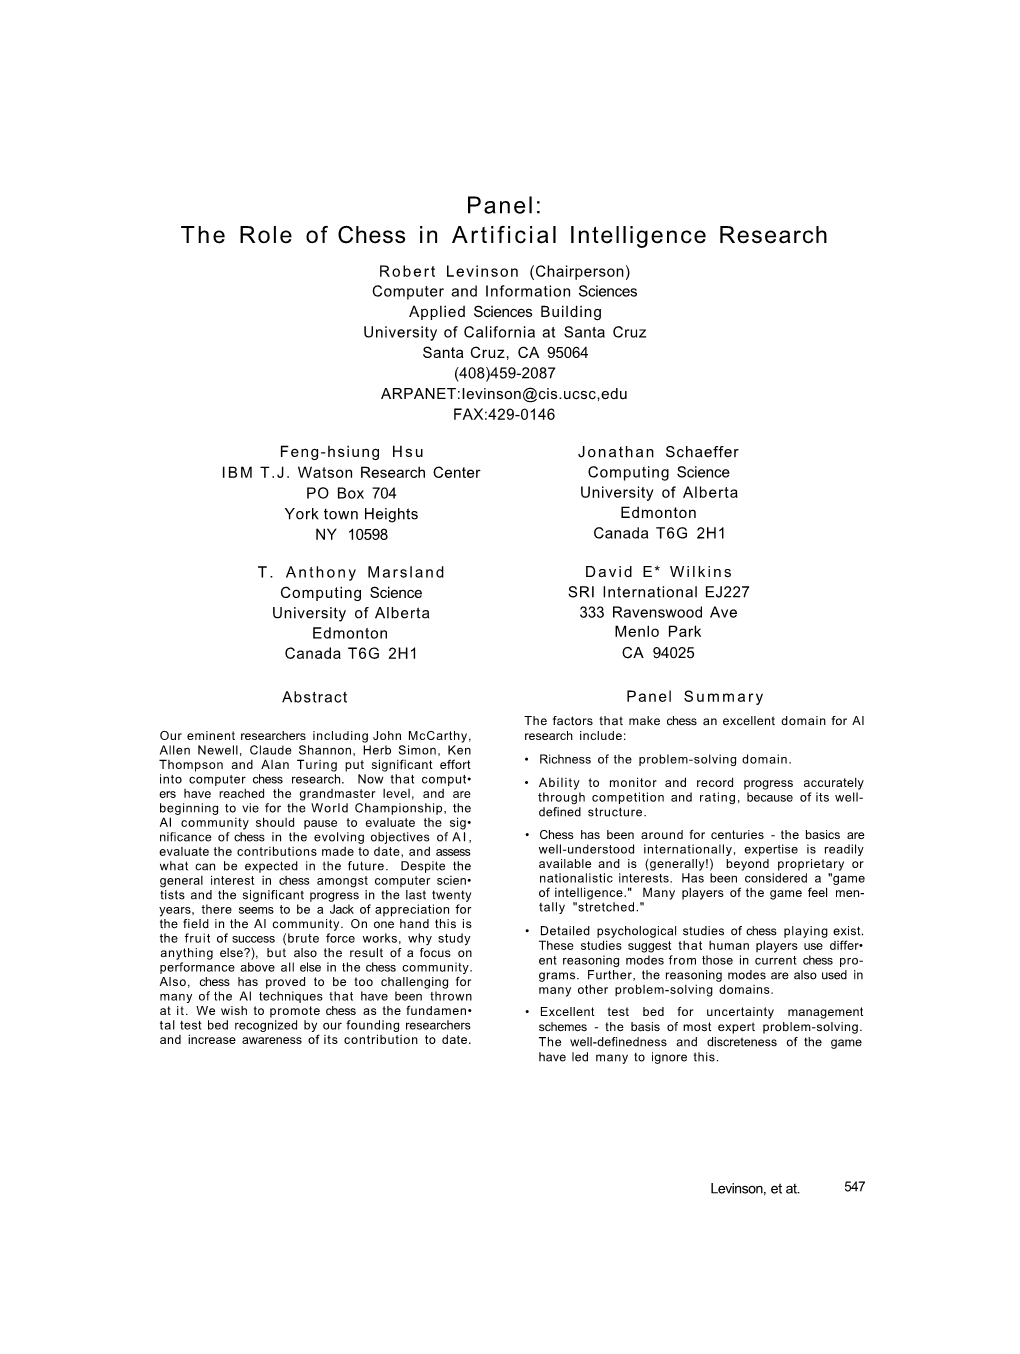 Panel: the Role of Chess in Artificial Intelligence Research